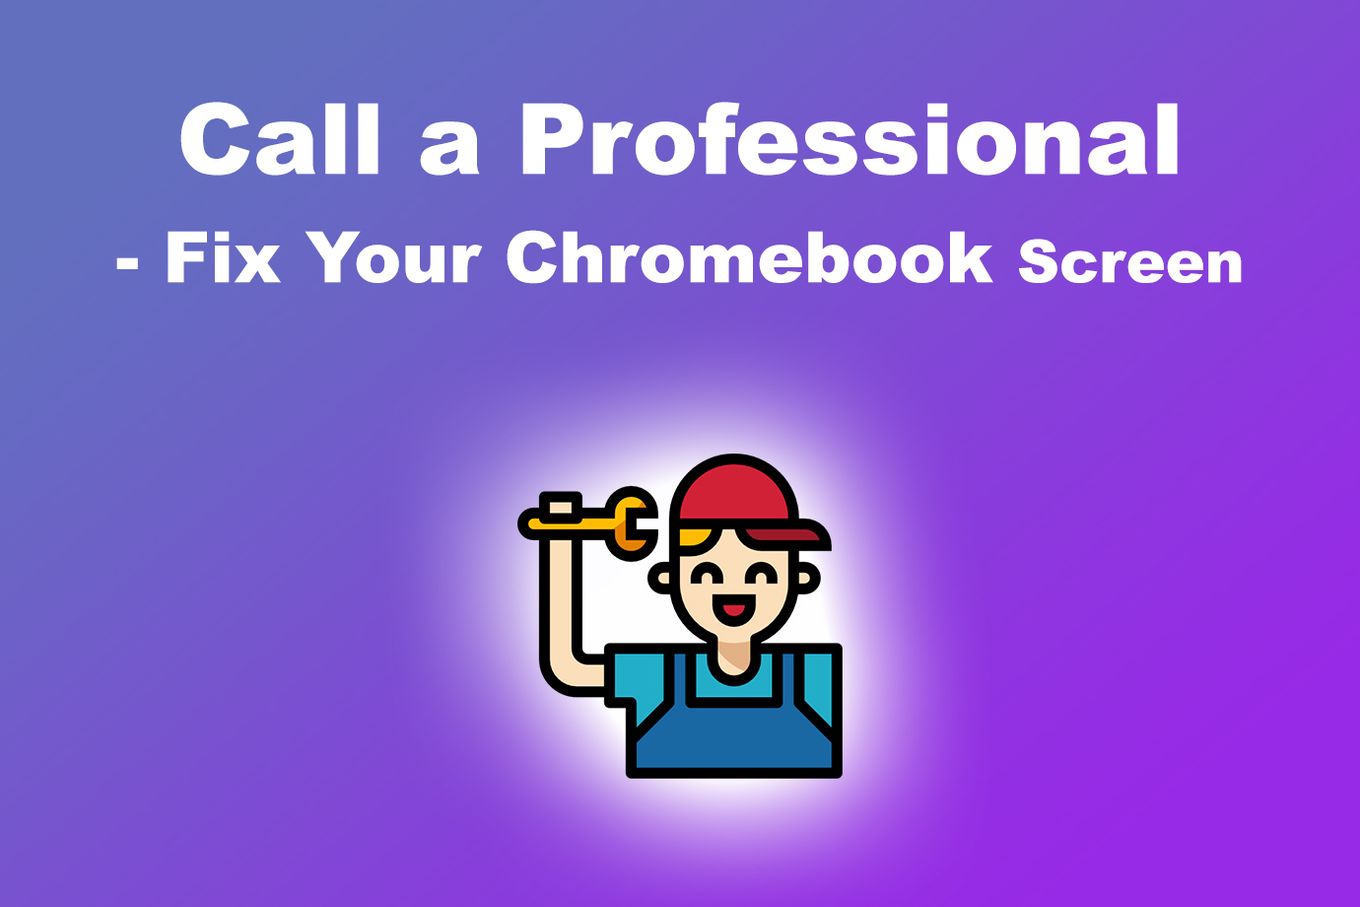 Call a Professional - Fix Your Chromebook Screen